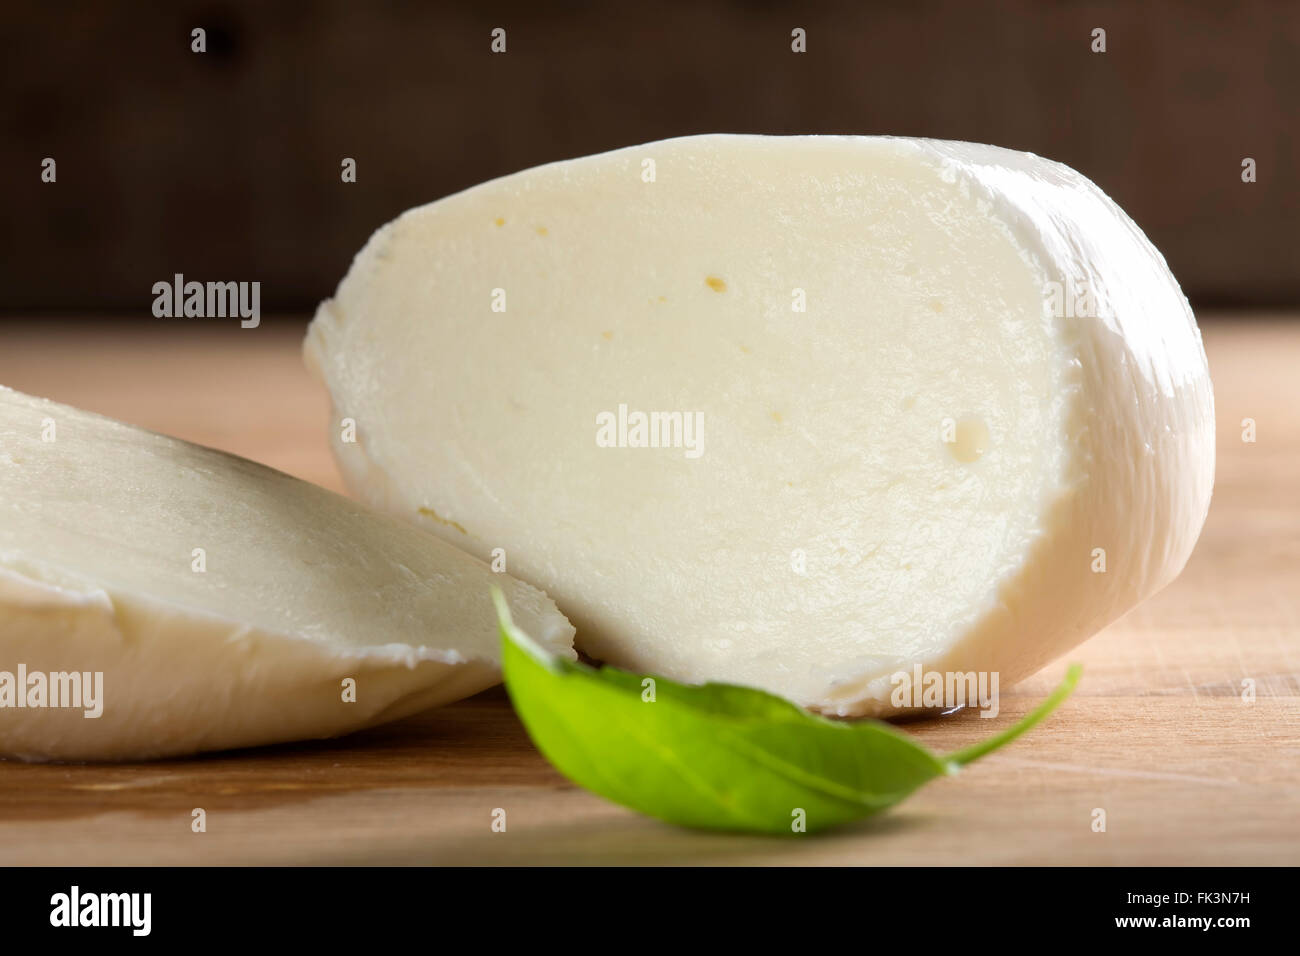 Close up of sliced mozzarella on wooden table Stock Photo